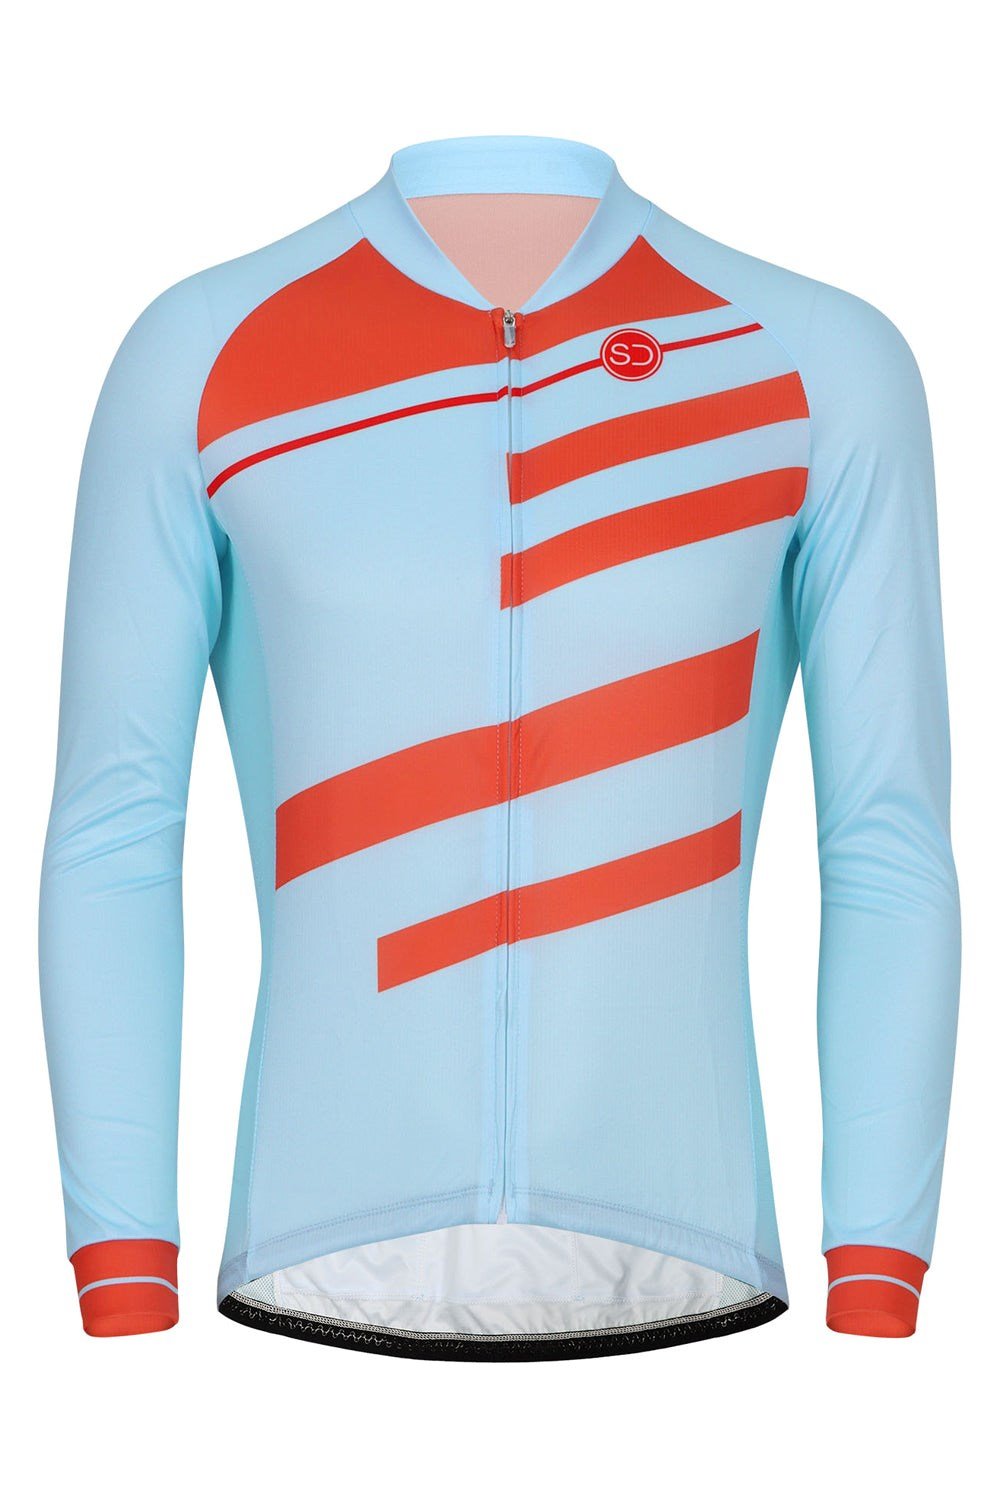 Ecrins Mens Long Sleeve Cycle Jersey -